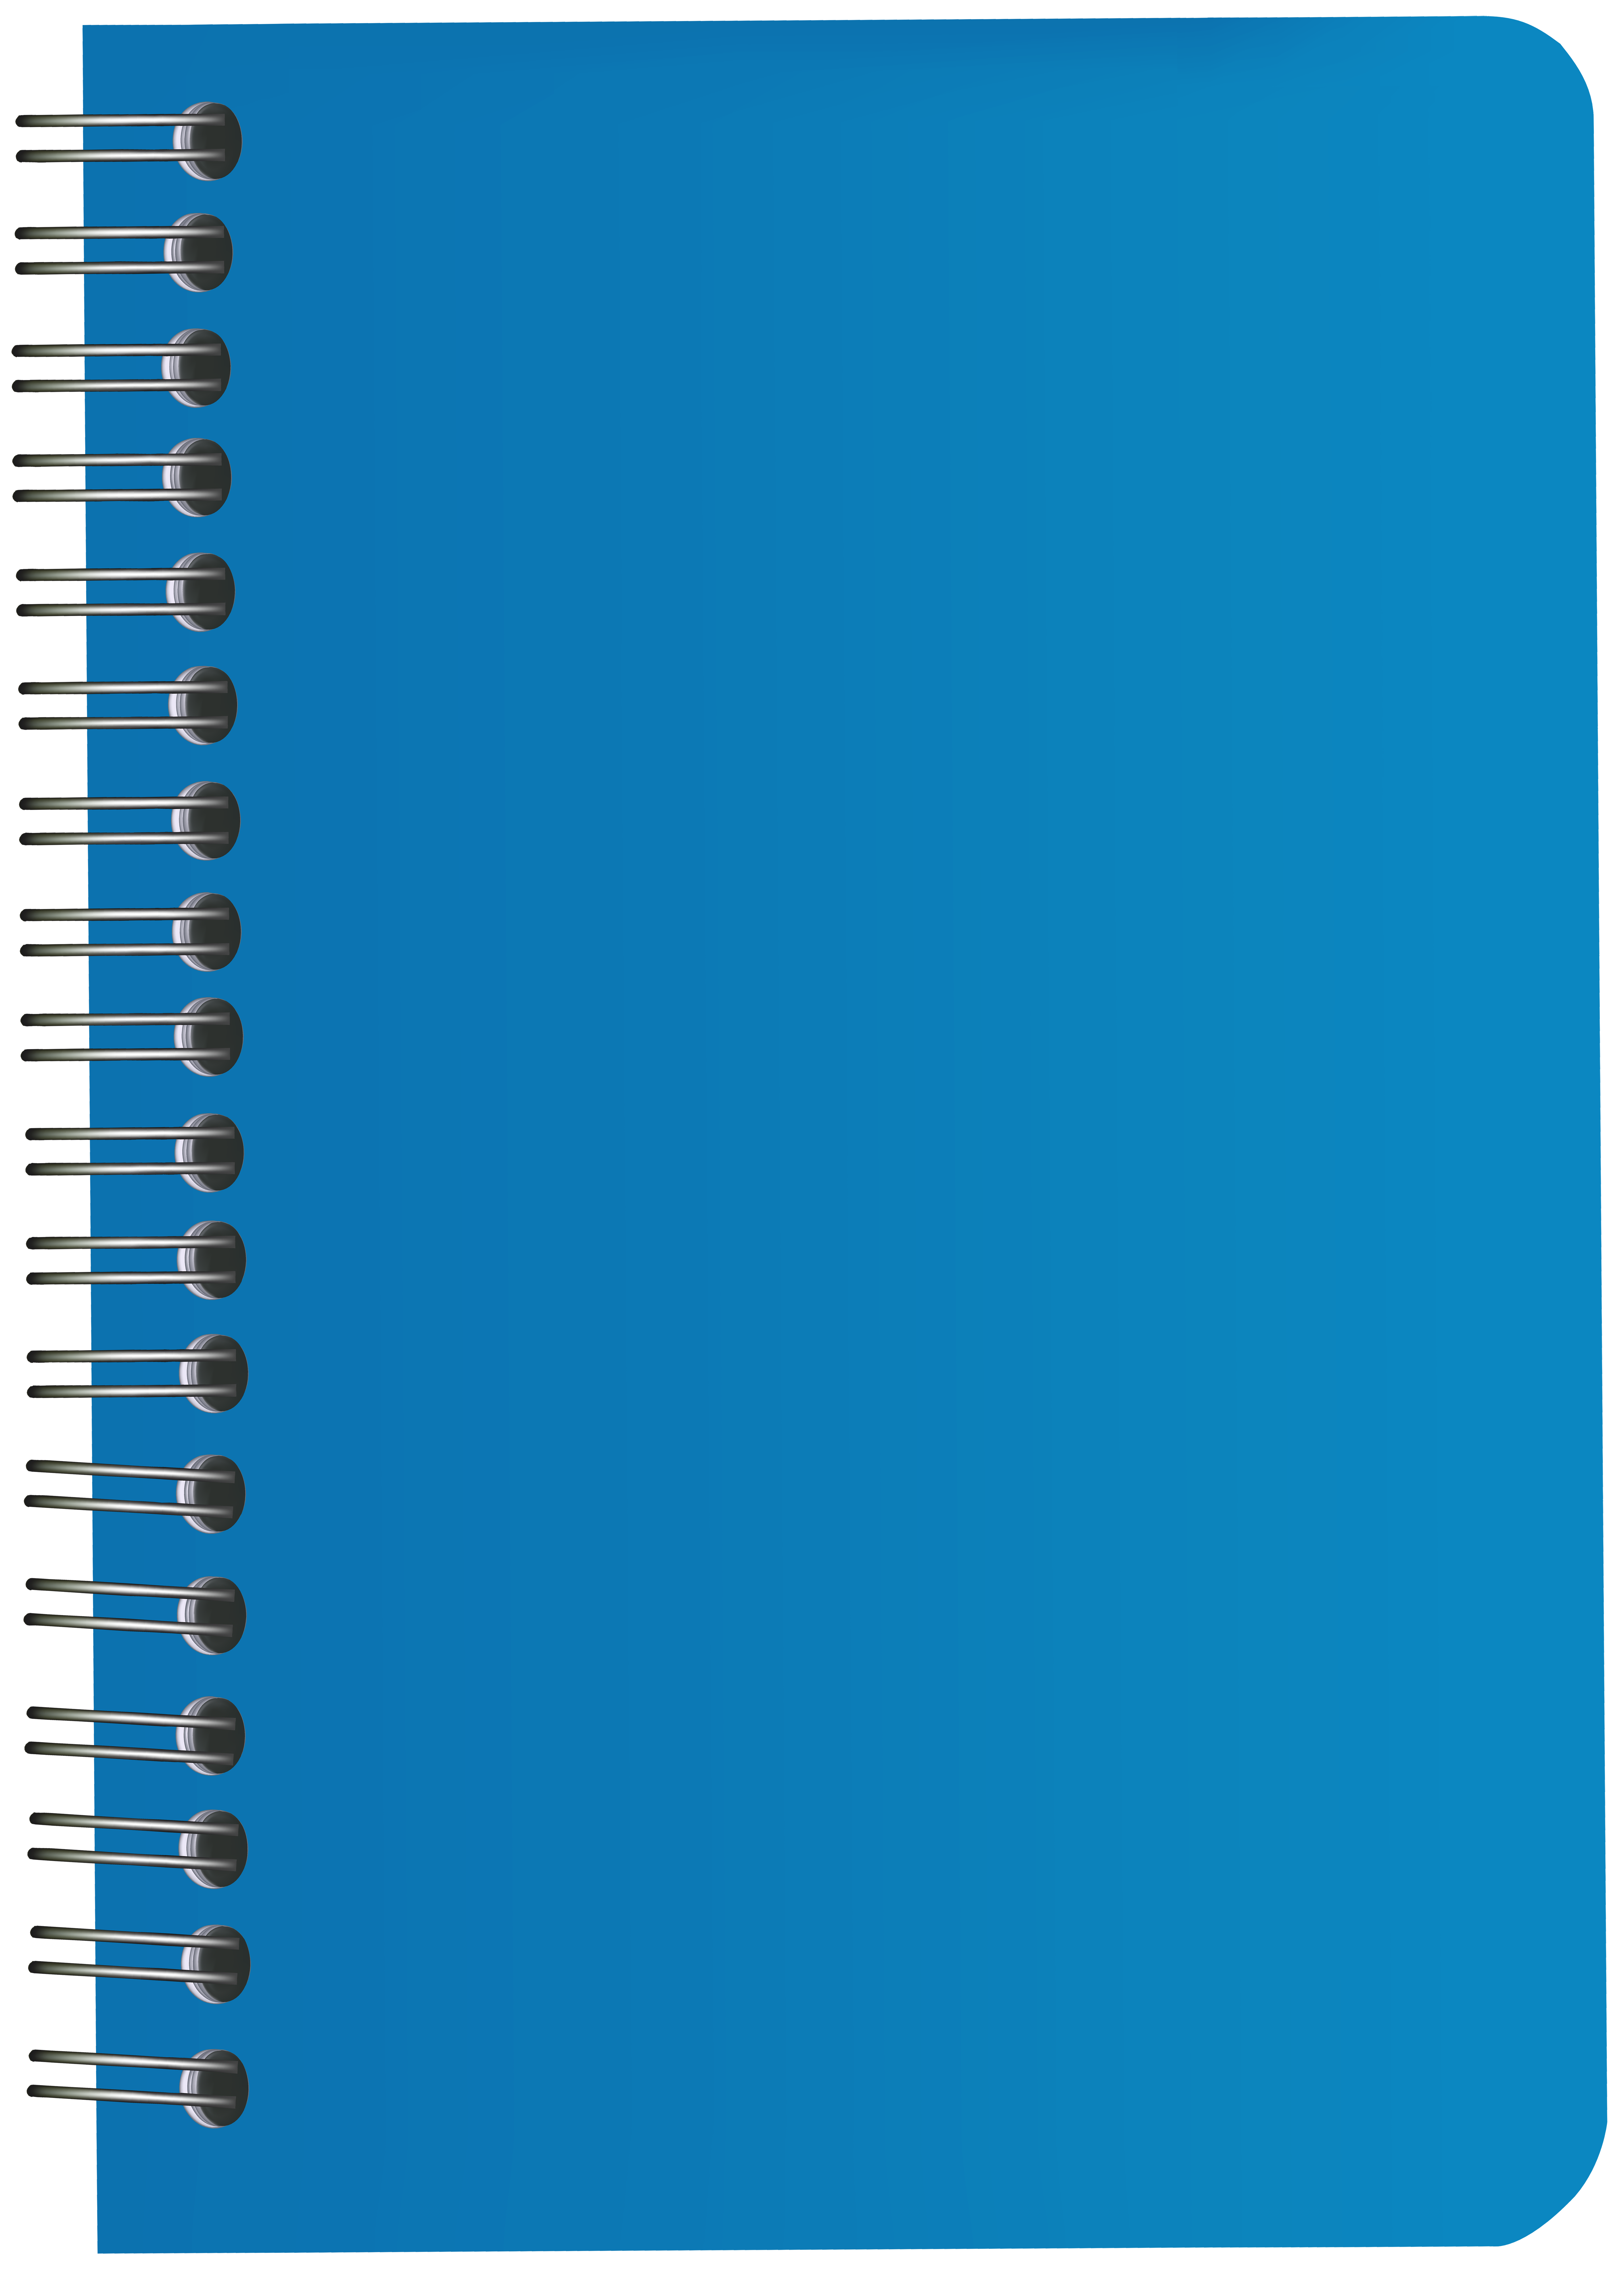 Notebook PNG Image Background